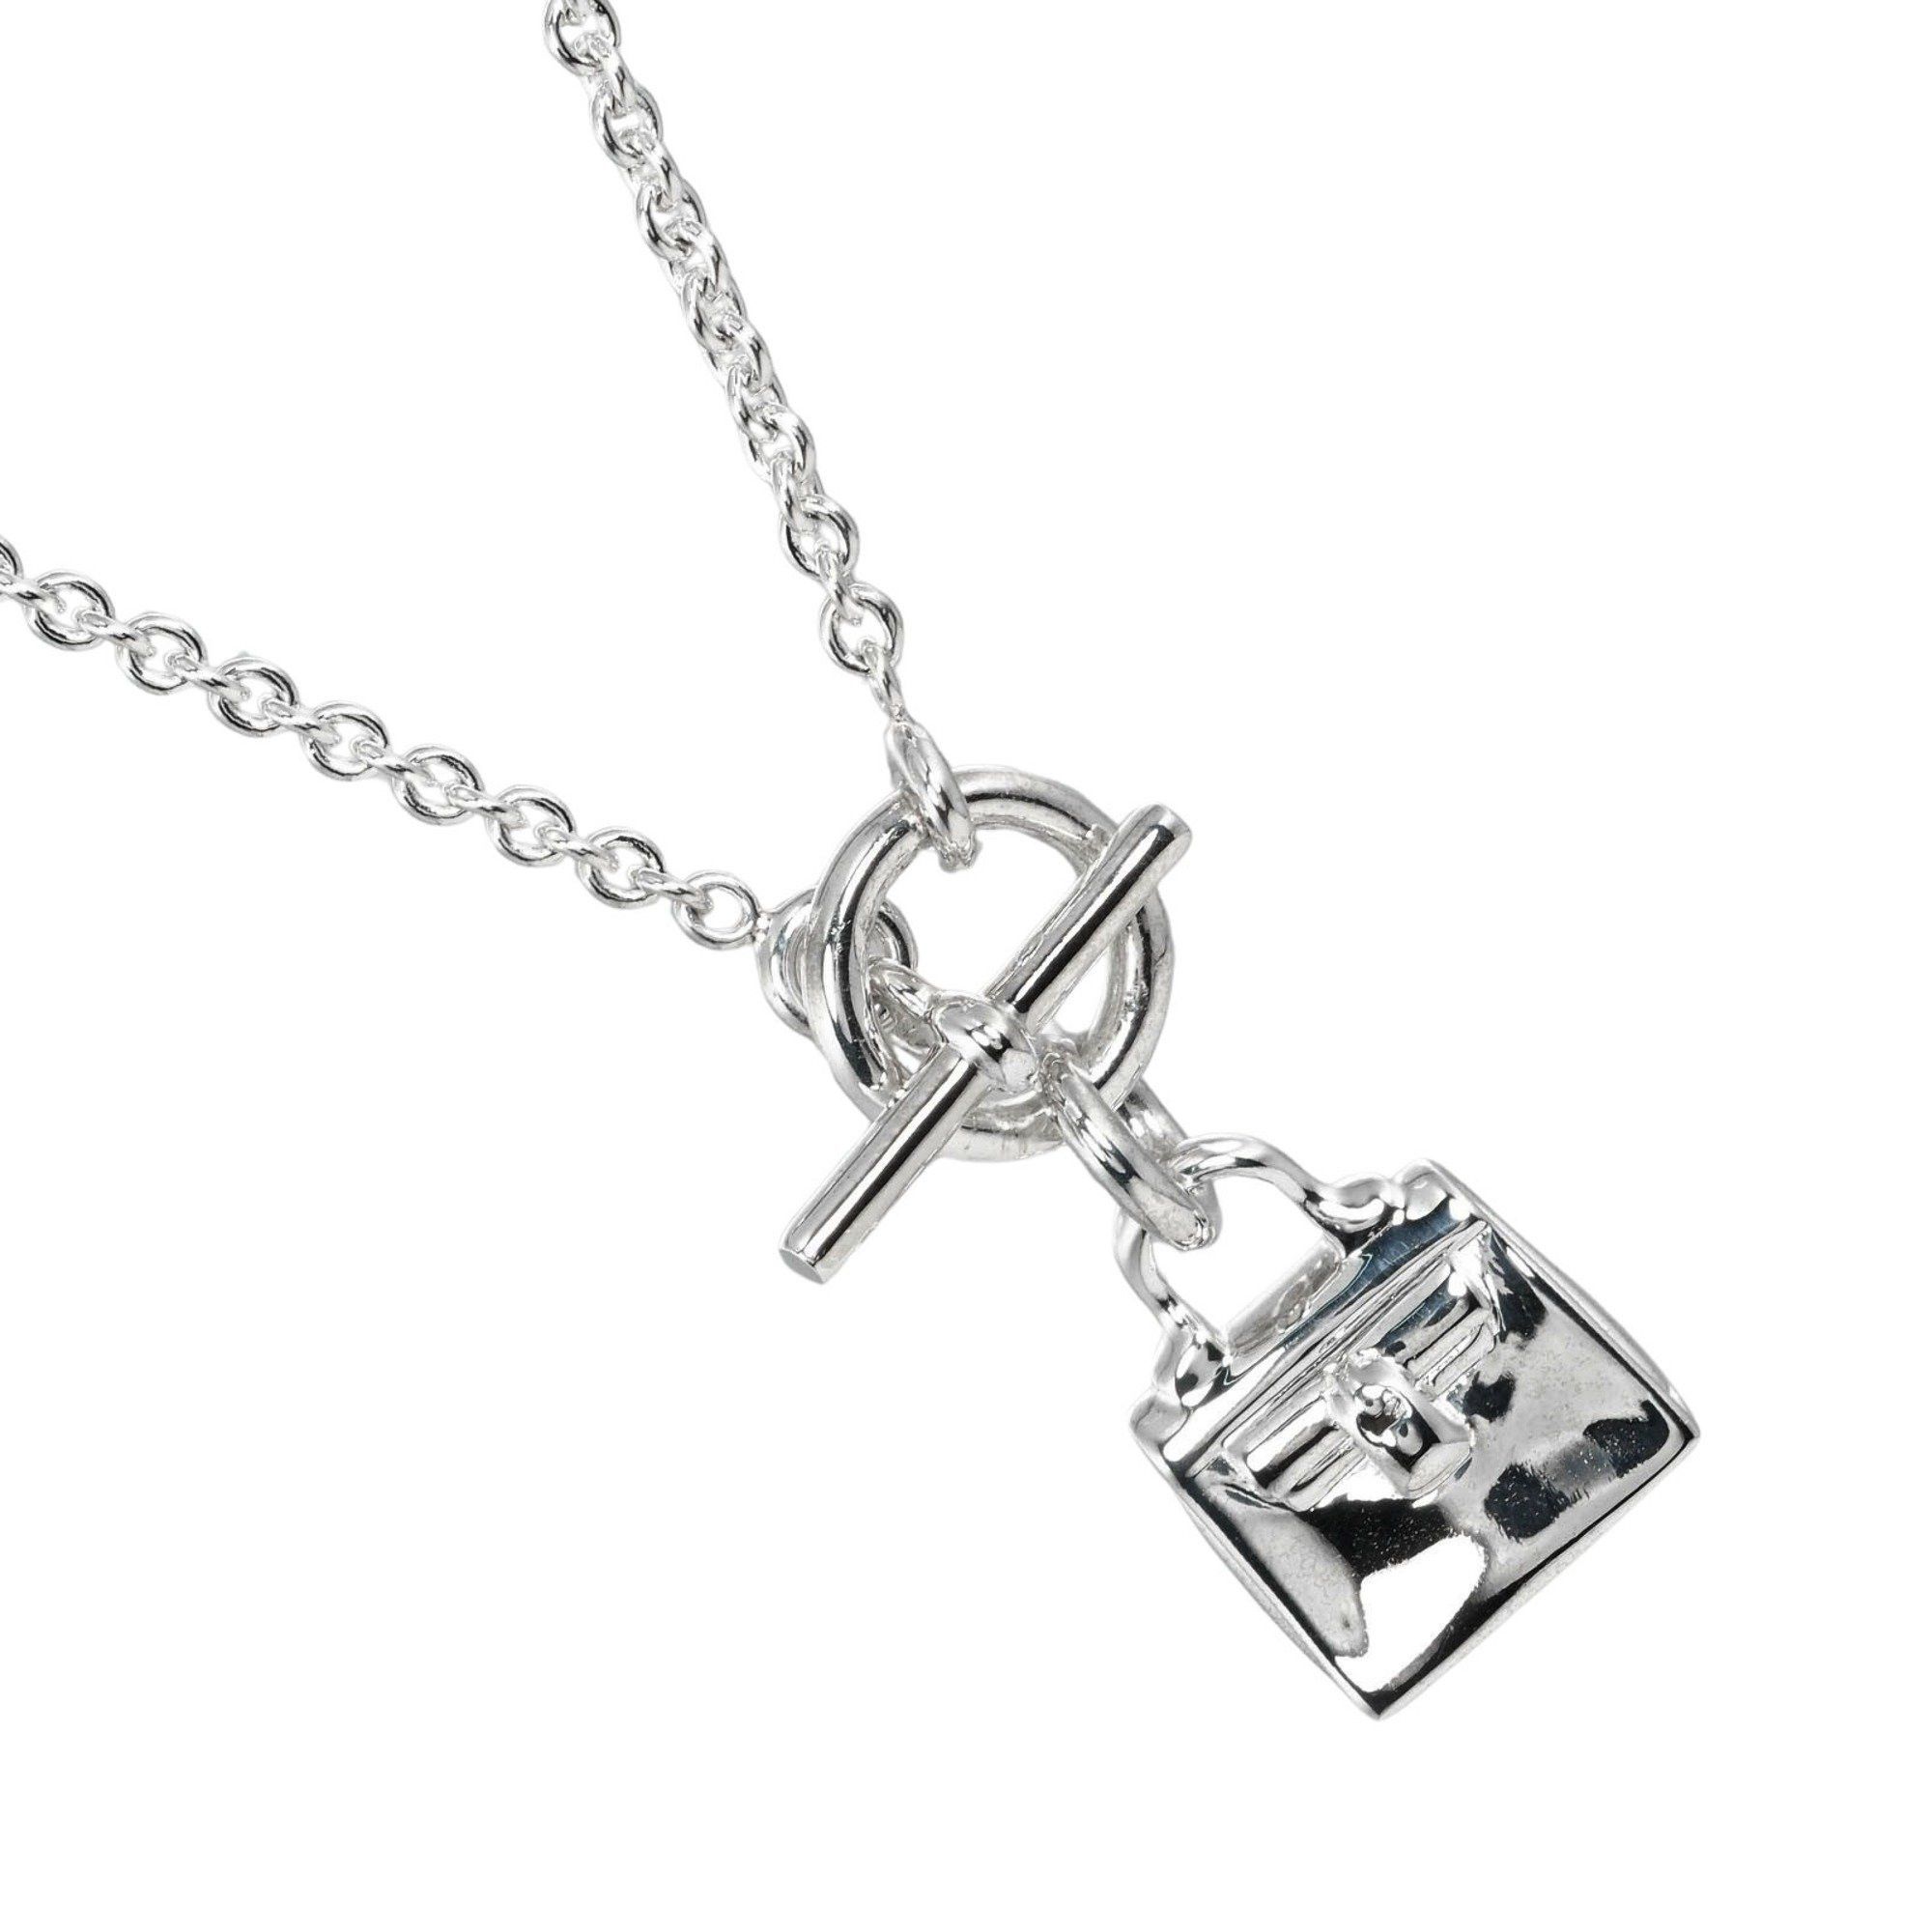 image of Hermes Amulet Kelly Necklace Silver 925 Approx. 12.2G T121724515, Women's